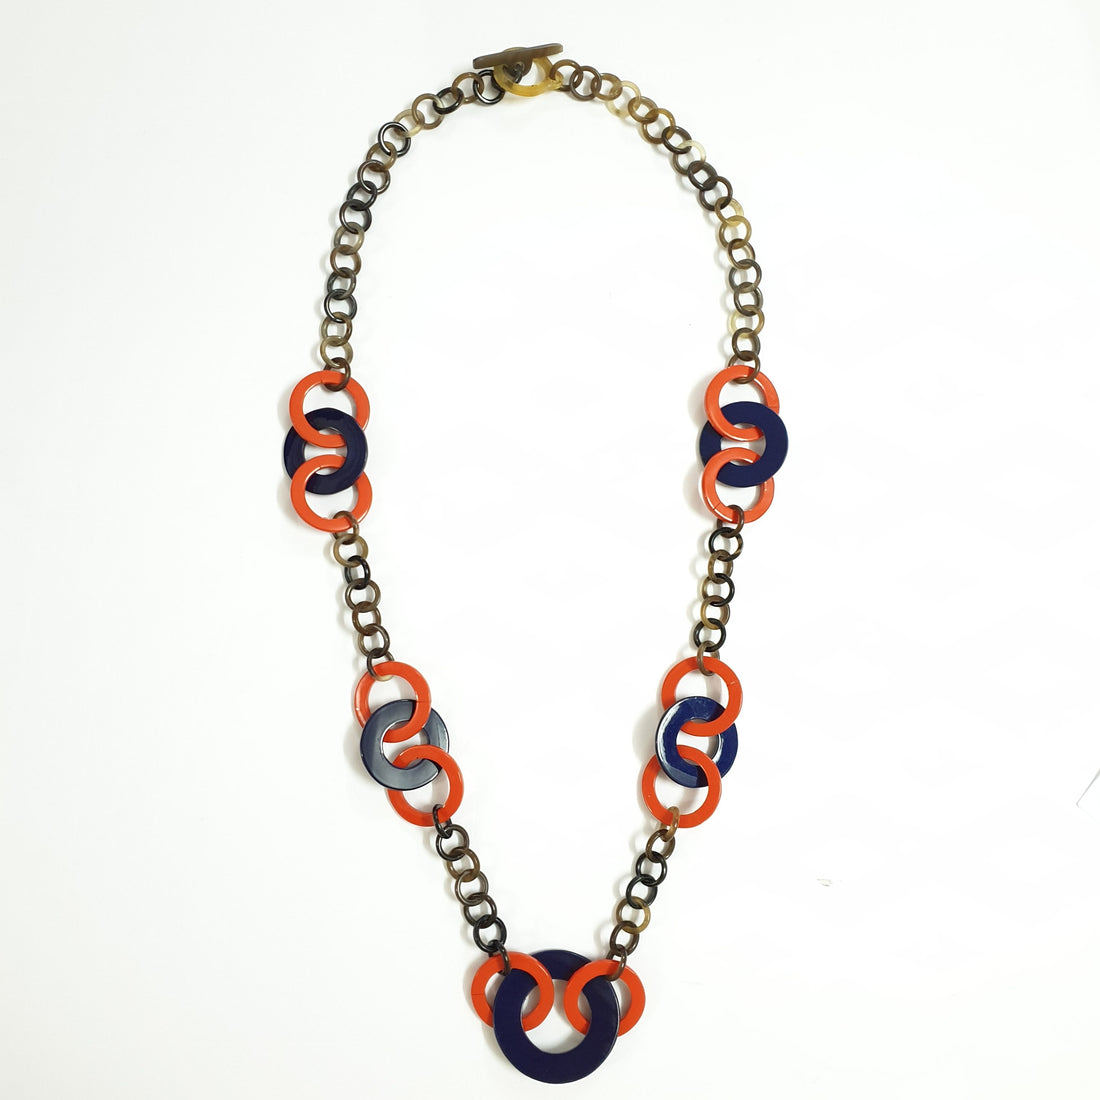 Jasmino unique handmade Bohemian chain link necklace features blue and orange in natural buffalo horn for women